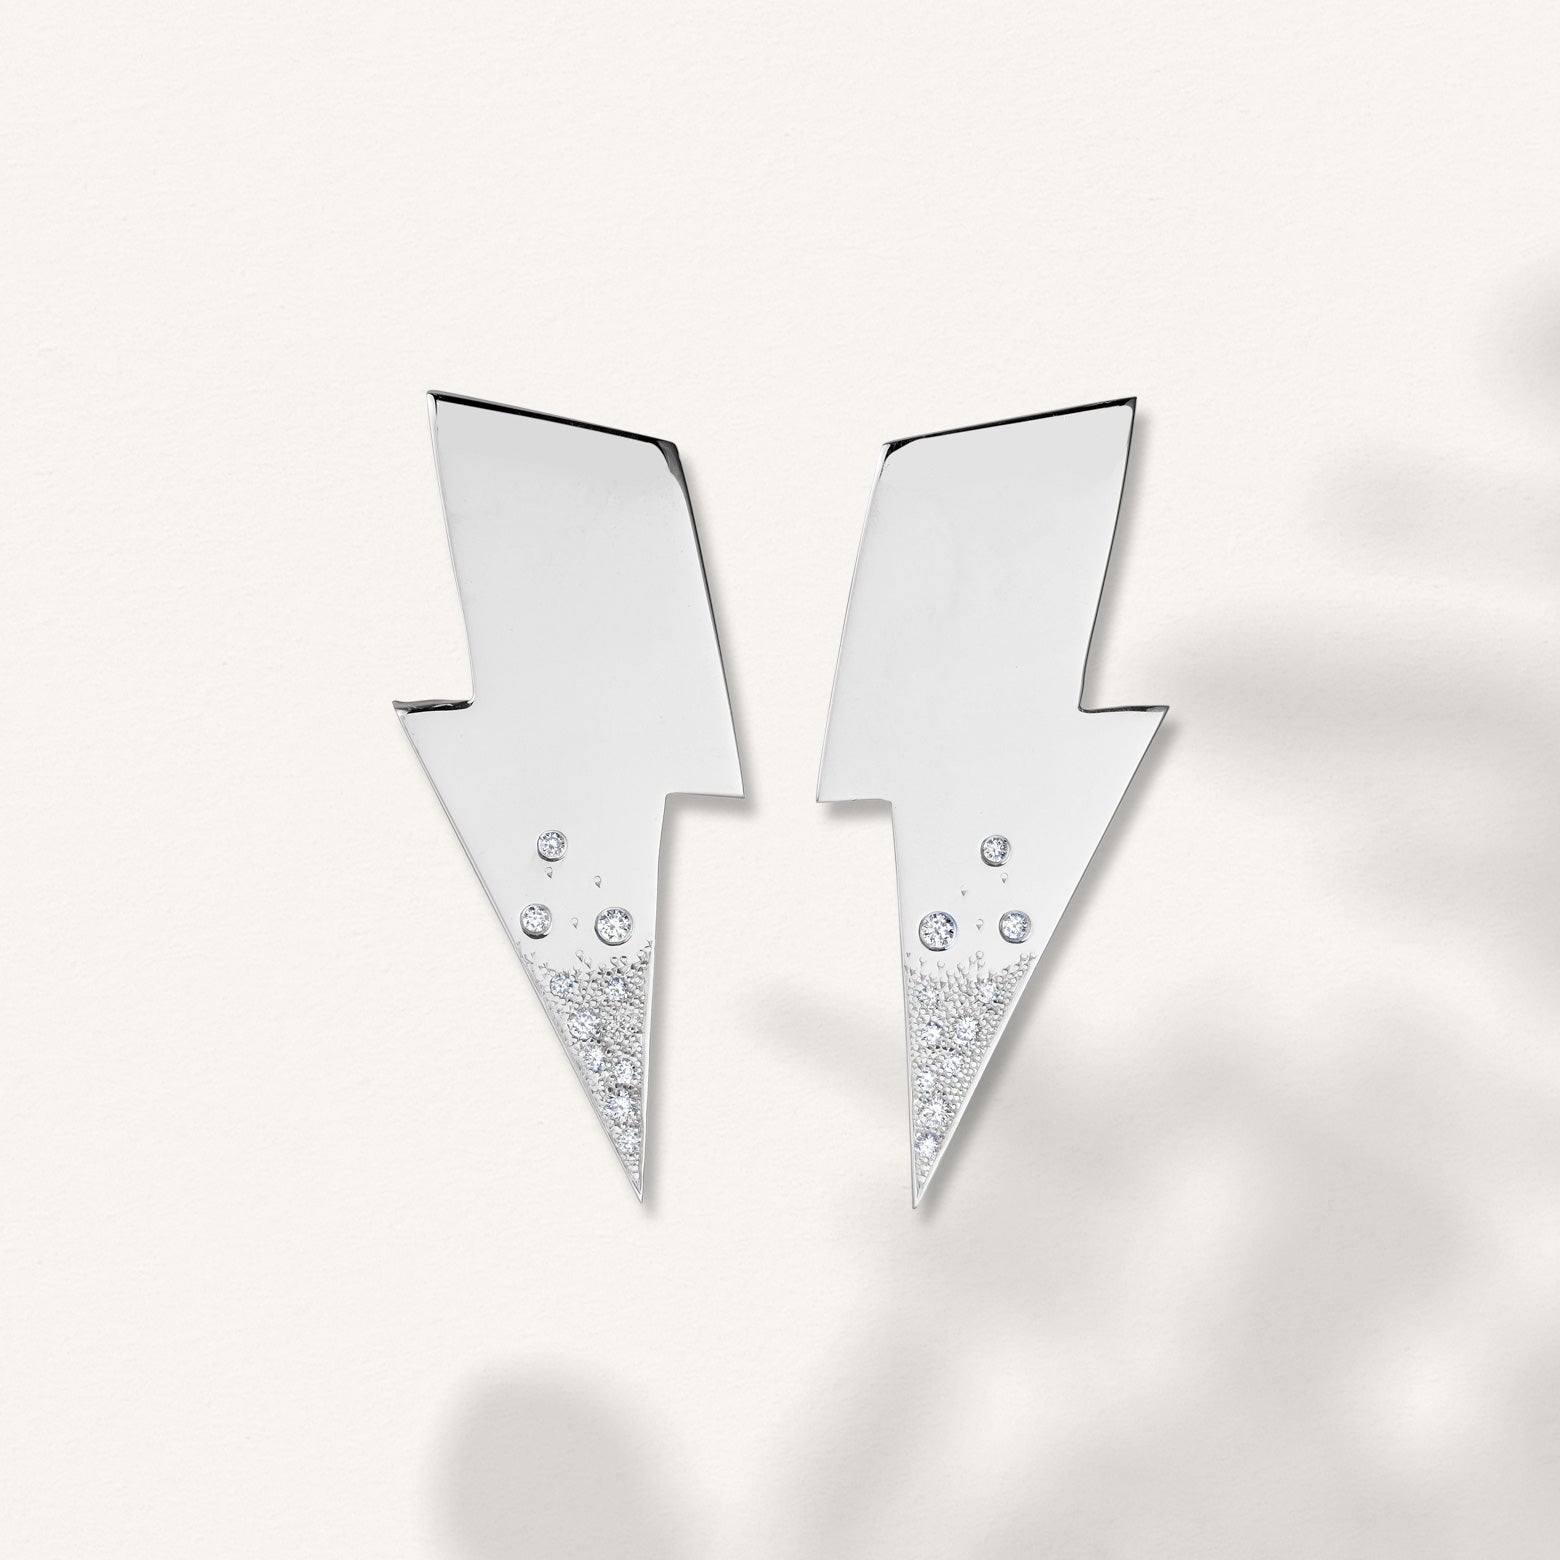 Kelly Woodcroft handcrafted lightening bolt shaped earrings in sterling silver feature a spattering of small diamonds.